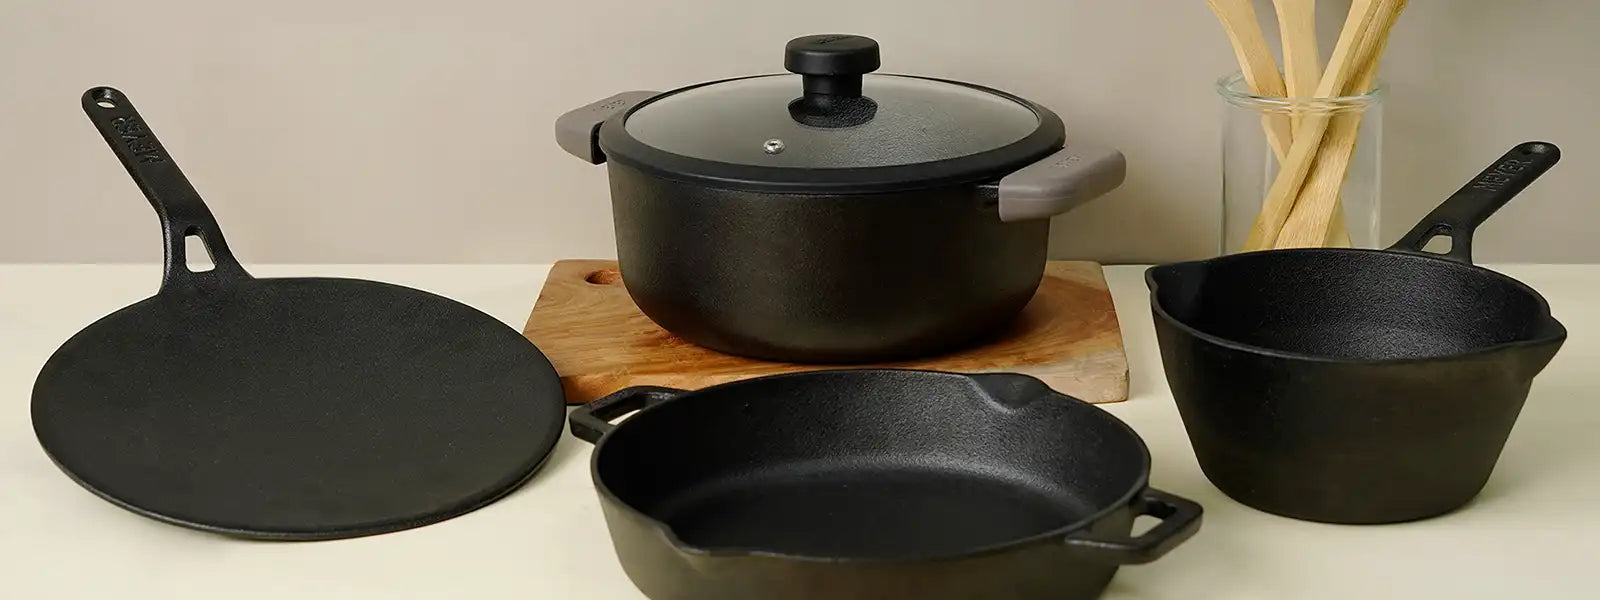 Top 3 trusted cast iron cookware sets of 2022